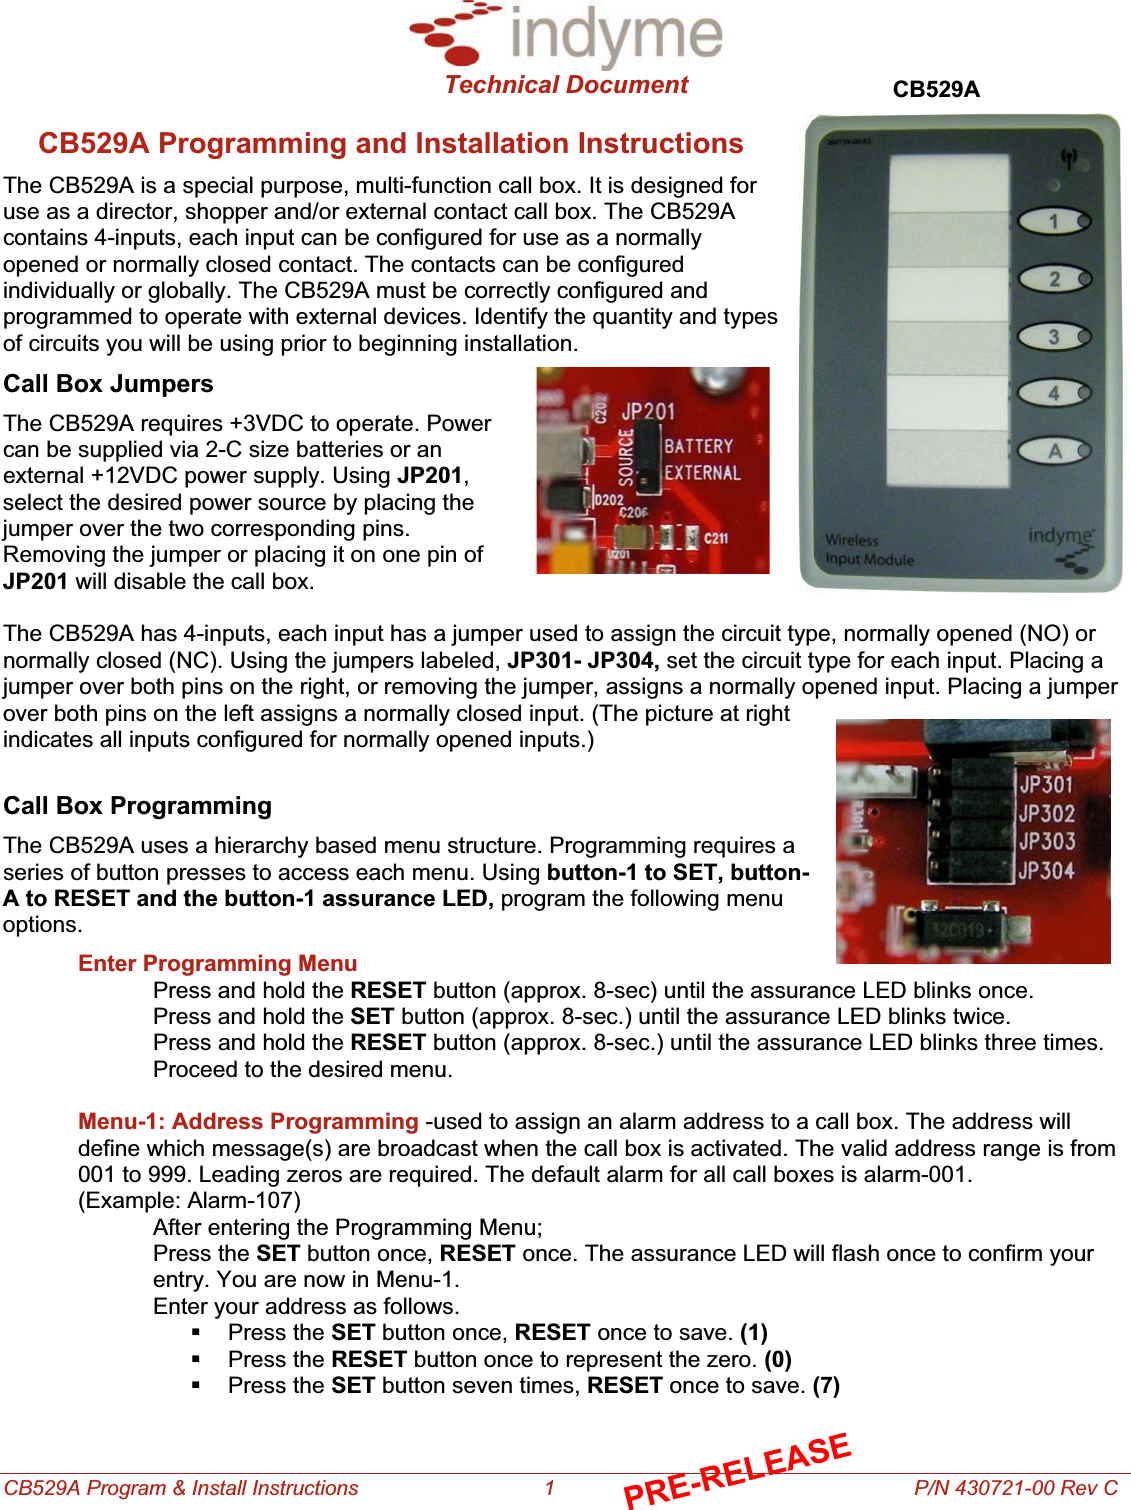 Technical Document CB529A Program &amp; Install Instructions                                1                                                              P/N 430721-00 Rev C CB529ACB529A Programming and Installation Instructions The CB529A is a special purpose, multi-function call box. It is designed for use as a director, shopper and/or external contact call box. The CB529A contains 4-inputs, each input can be configured for use as a normally opened or normally closed contact. The contacts can be configured individually or globally. The CB529A must be correctly configured and programmed to operate with external devices. Identify the quantity and types of circuits you will be using prior to beginning installation. Call Box JumpersThe CB529A requires +3VDC to operate. Power can be supplied via 2-C size batteries or an external +12VDC power supply. Using JP201,select the desired power source by placing the jumper over the two corresponding pins. Removing the jumper or placing it on one pin of JP201 will disable the call box. The CB529A has 4-inputs, each input has a jumper used to assign the circuit type, normally opened (NO) or normally closed (NC). Using the jumpers labeled, JP301- JP304, set the circuit type for each input. Placing a jumper over both pins on the right, or removing the jumper, assigns a normally opened input. Placing a jumper over both pins on the left assigns a normally closed input. (The picture at right indicates all inputs configured for normally opened inputs.) Call Box ProgrammingThe CB529A uses a hierarchy based menu structure. Programming requires a series of button presses to access each menu. Using button-1 to SET, button-A to RESET and the button-1 assurance LED, program the following menu options.Enter Programming MenuPress and hold the RESET button (approx. 8-sec) until the assurance LED blinks once. Press and hold the SET button (approx. 8-sec.) until the assurance LED blinks twice. Press and hold the RESET button (approx. 8-sec.) until the assurance LED blinks three times. Proceed to the desired menu. Menu-1: Address Programming -used to assign an alarm address to a call box. The address will define which message(s) are broadcast when the call box is activated. The valid address range is from 001 to 999. Leading zeros are required. The default alarm for all call boxes is alarm-001.                   (Example: Alarm-107) After entering the Programming Menu; Press the SET button once, RESET once. The assurance LED will flash once to confirm your entry. You are now in Menu-1. Enter your address as follows.  Press the SET button once, RESET once to save. (1) Press the RESET button once to represent the zero. (0) Press the SET button seven times, RESET once to save. (7)PRE-RELEASE